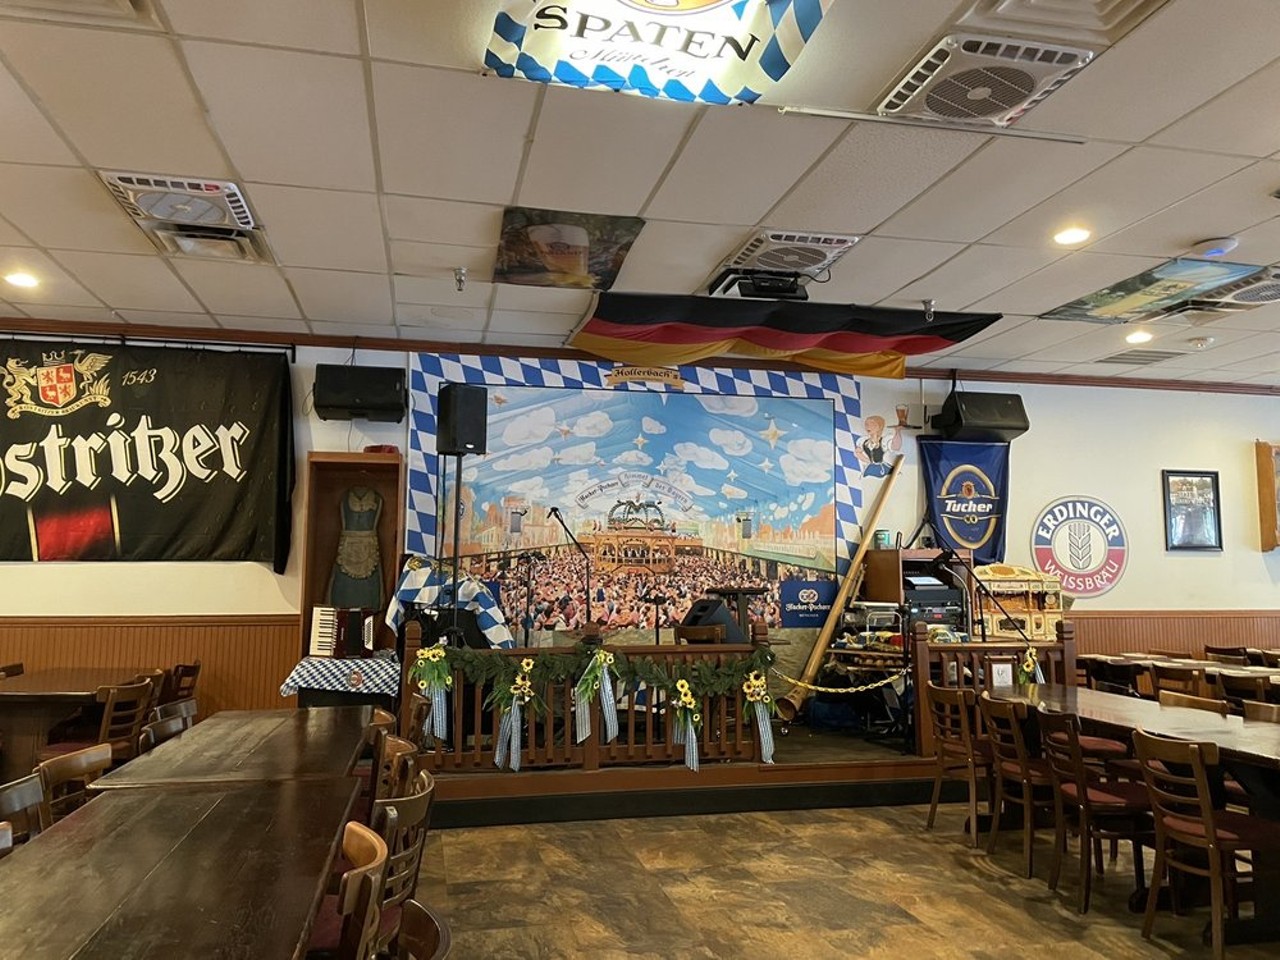 Hollerbach’s Willow Tree Cafe
201-205 E. First St., Sanford
Hollerbach’s Willow Tree Cafe offers German classics like schnitzel and wurst, plus plenty of beer and regular live music – all making for a friendly, fun atmosphere.